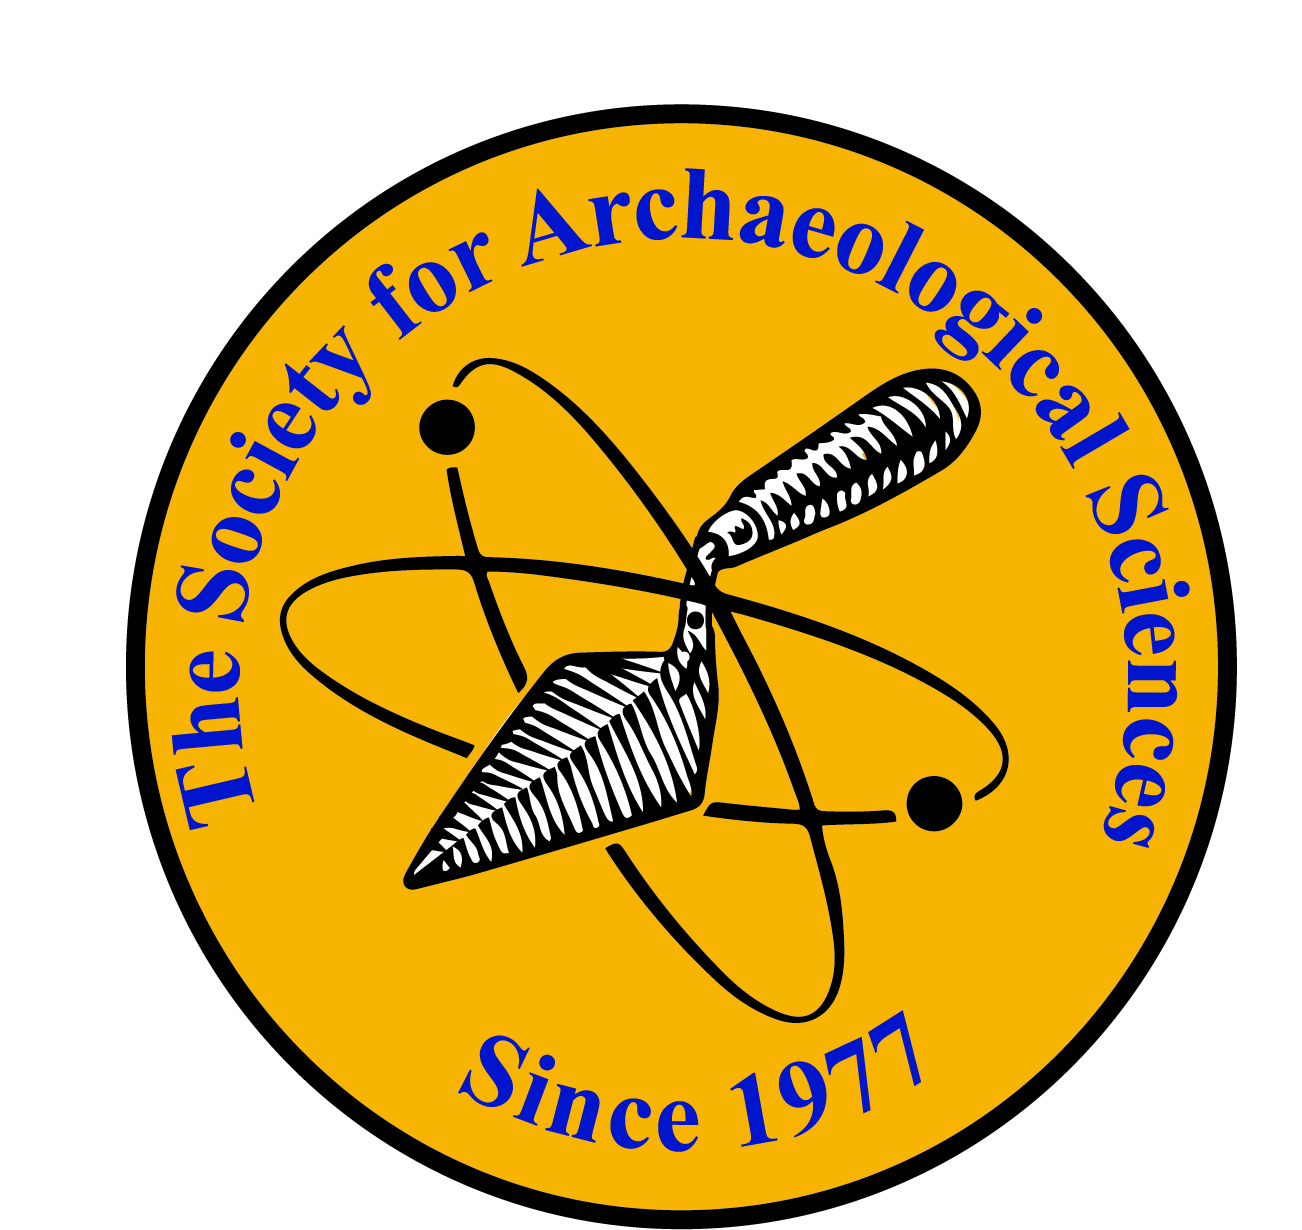 Society for Archaeological Sciences